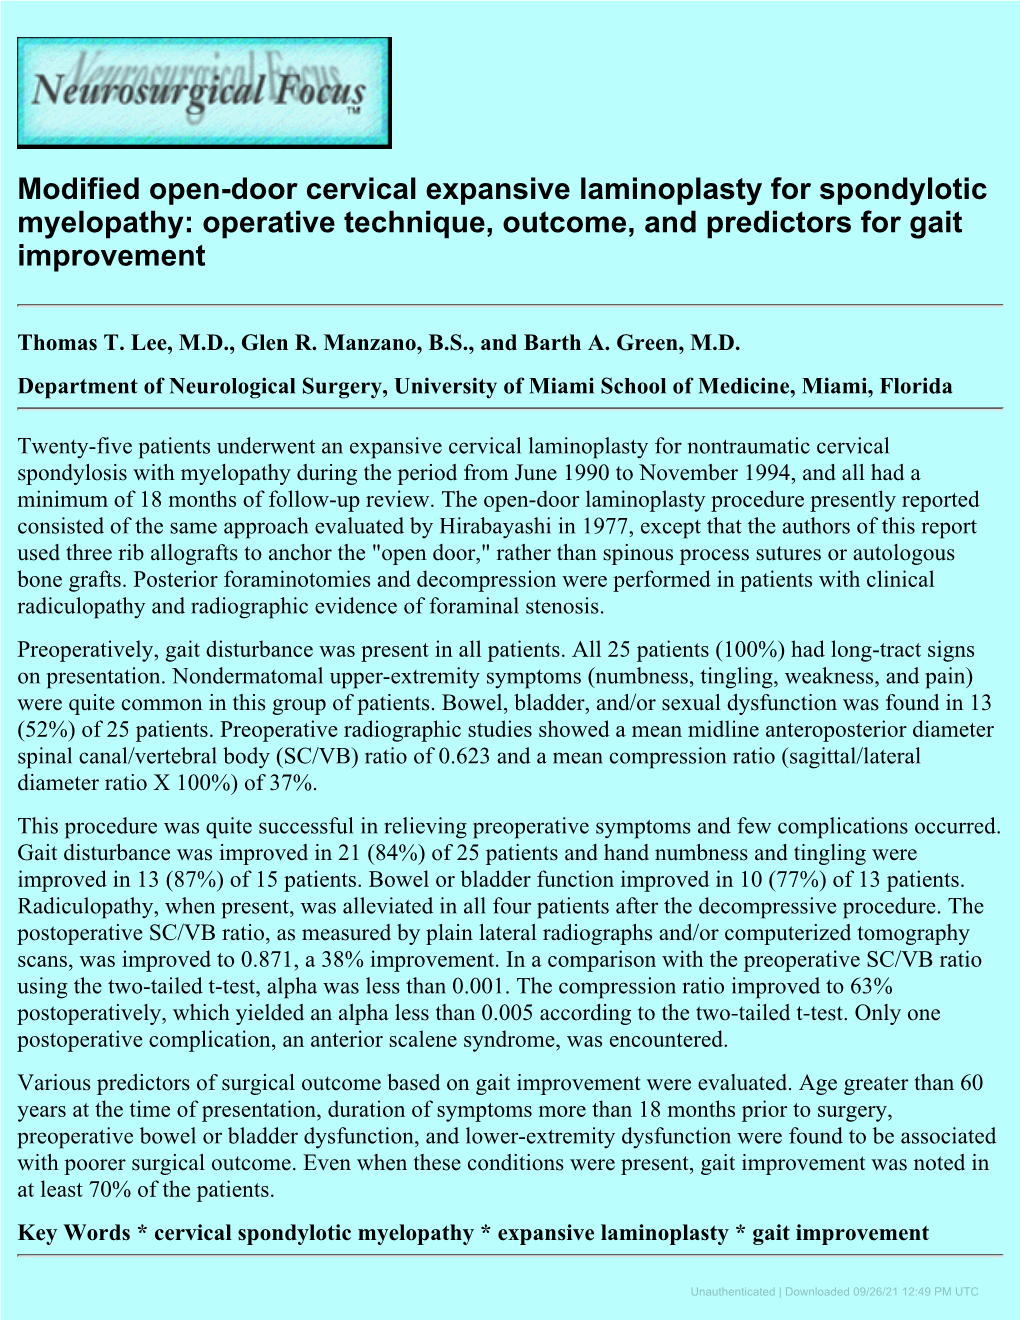 Modified Open-Door Cervical Expansive Laminoplasty for Spondylotic Myelopathy: Operative Technique, Outcome, and Predictors for Gait Improvement